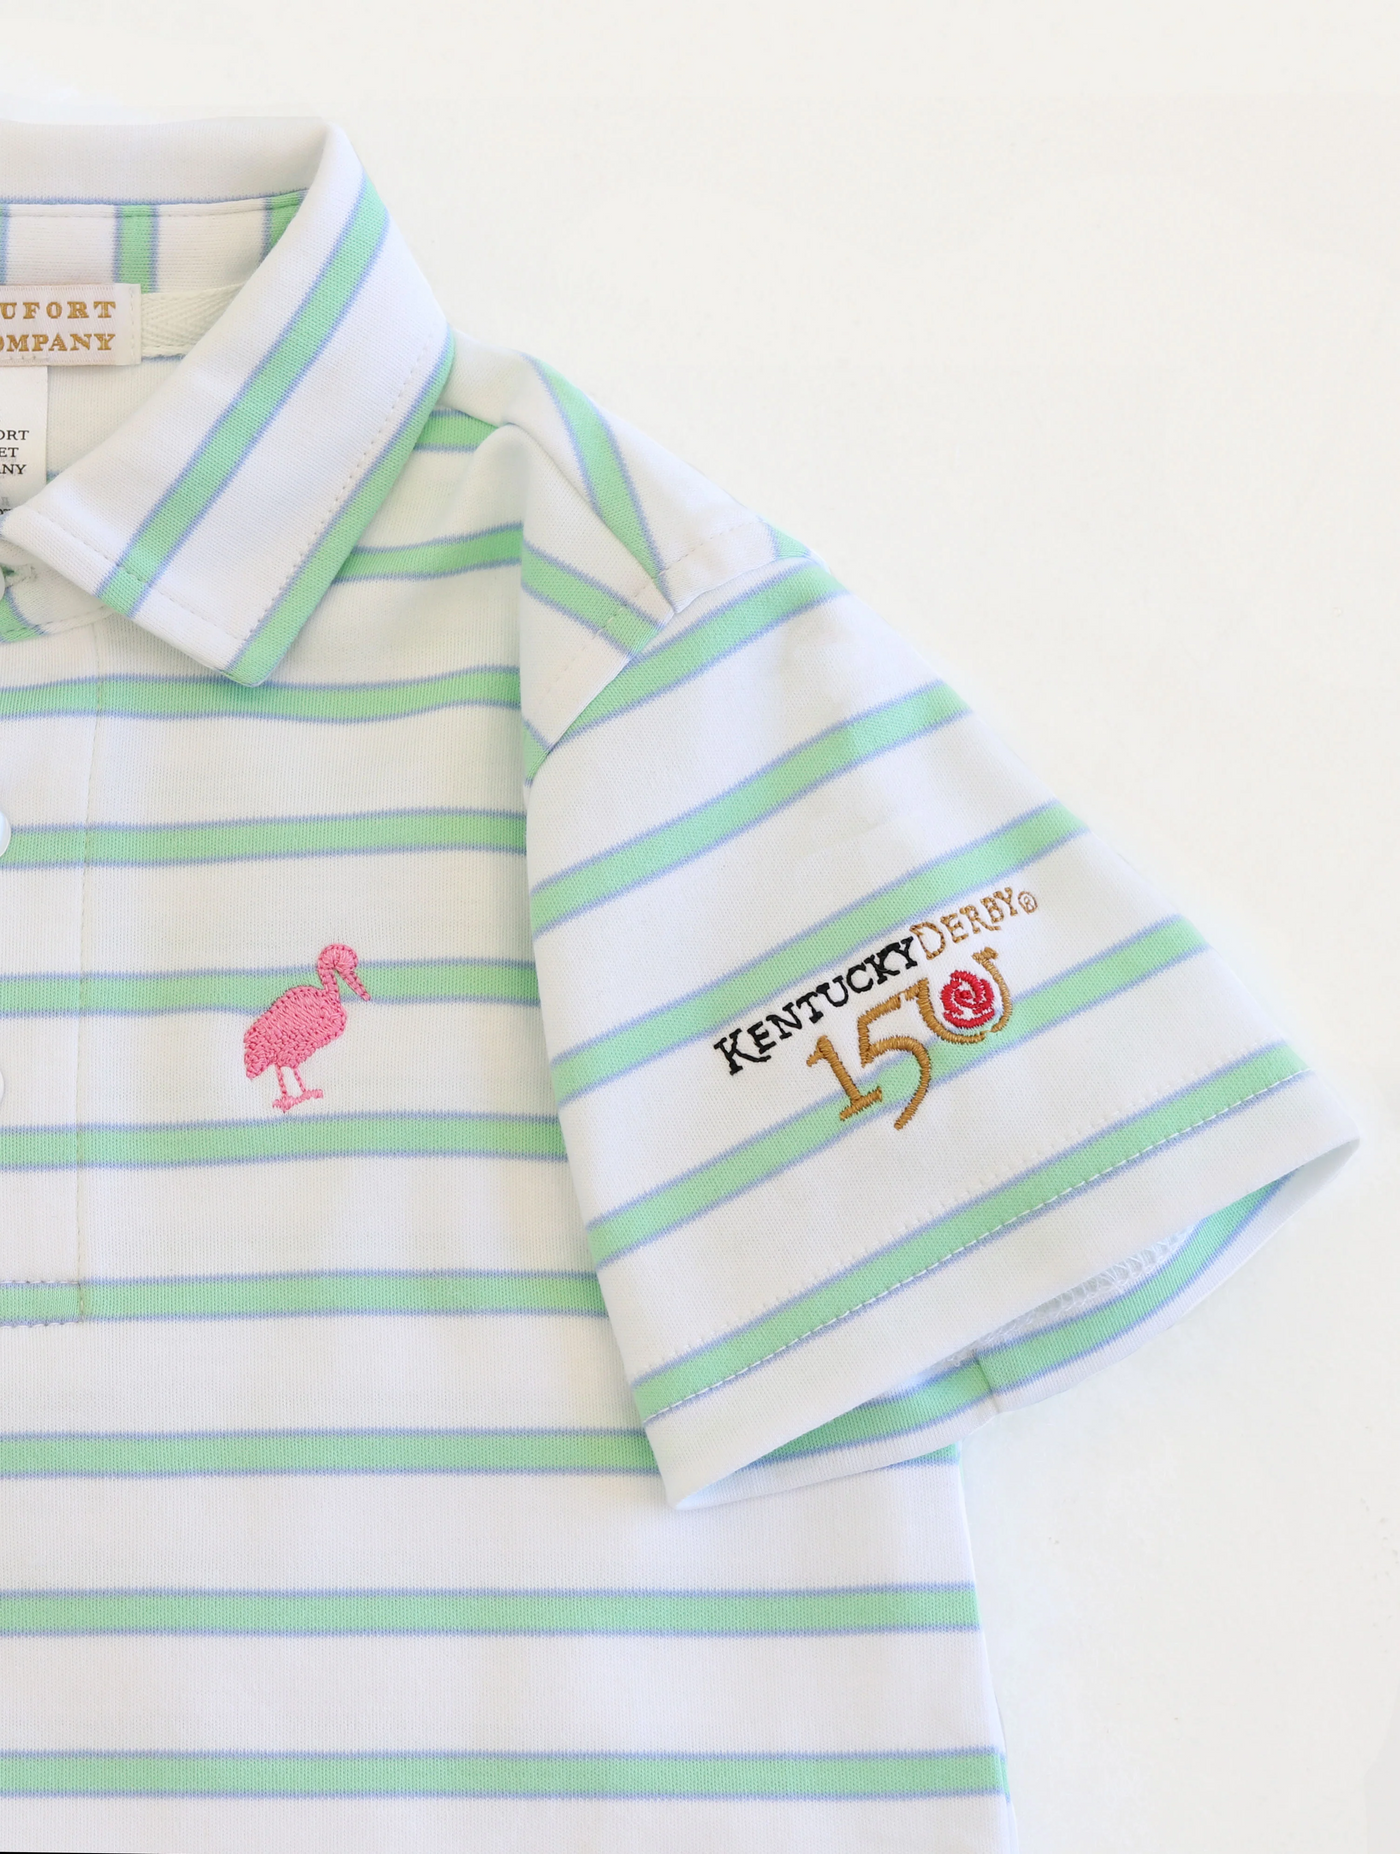 Prim & Proper Polo - Worth Avenue White, Park City Periwinkle, And Grace Bay Green Stripe With Hamptons Hot Pink Stork